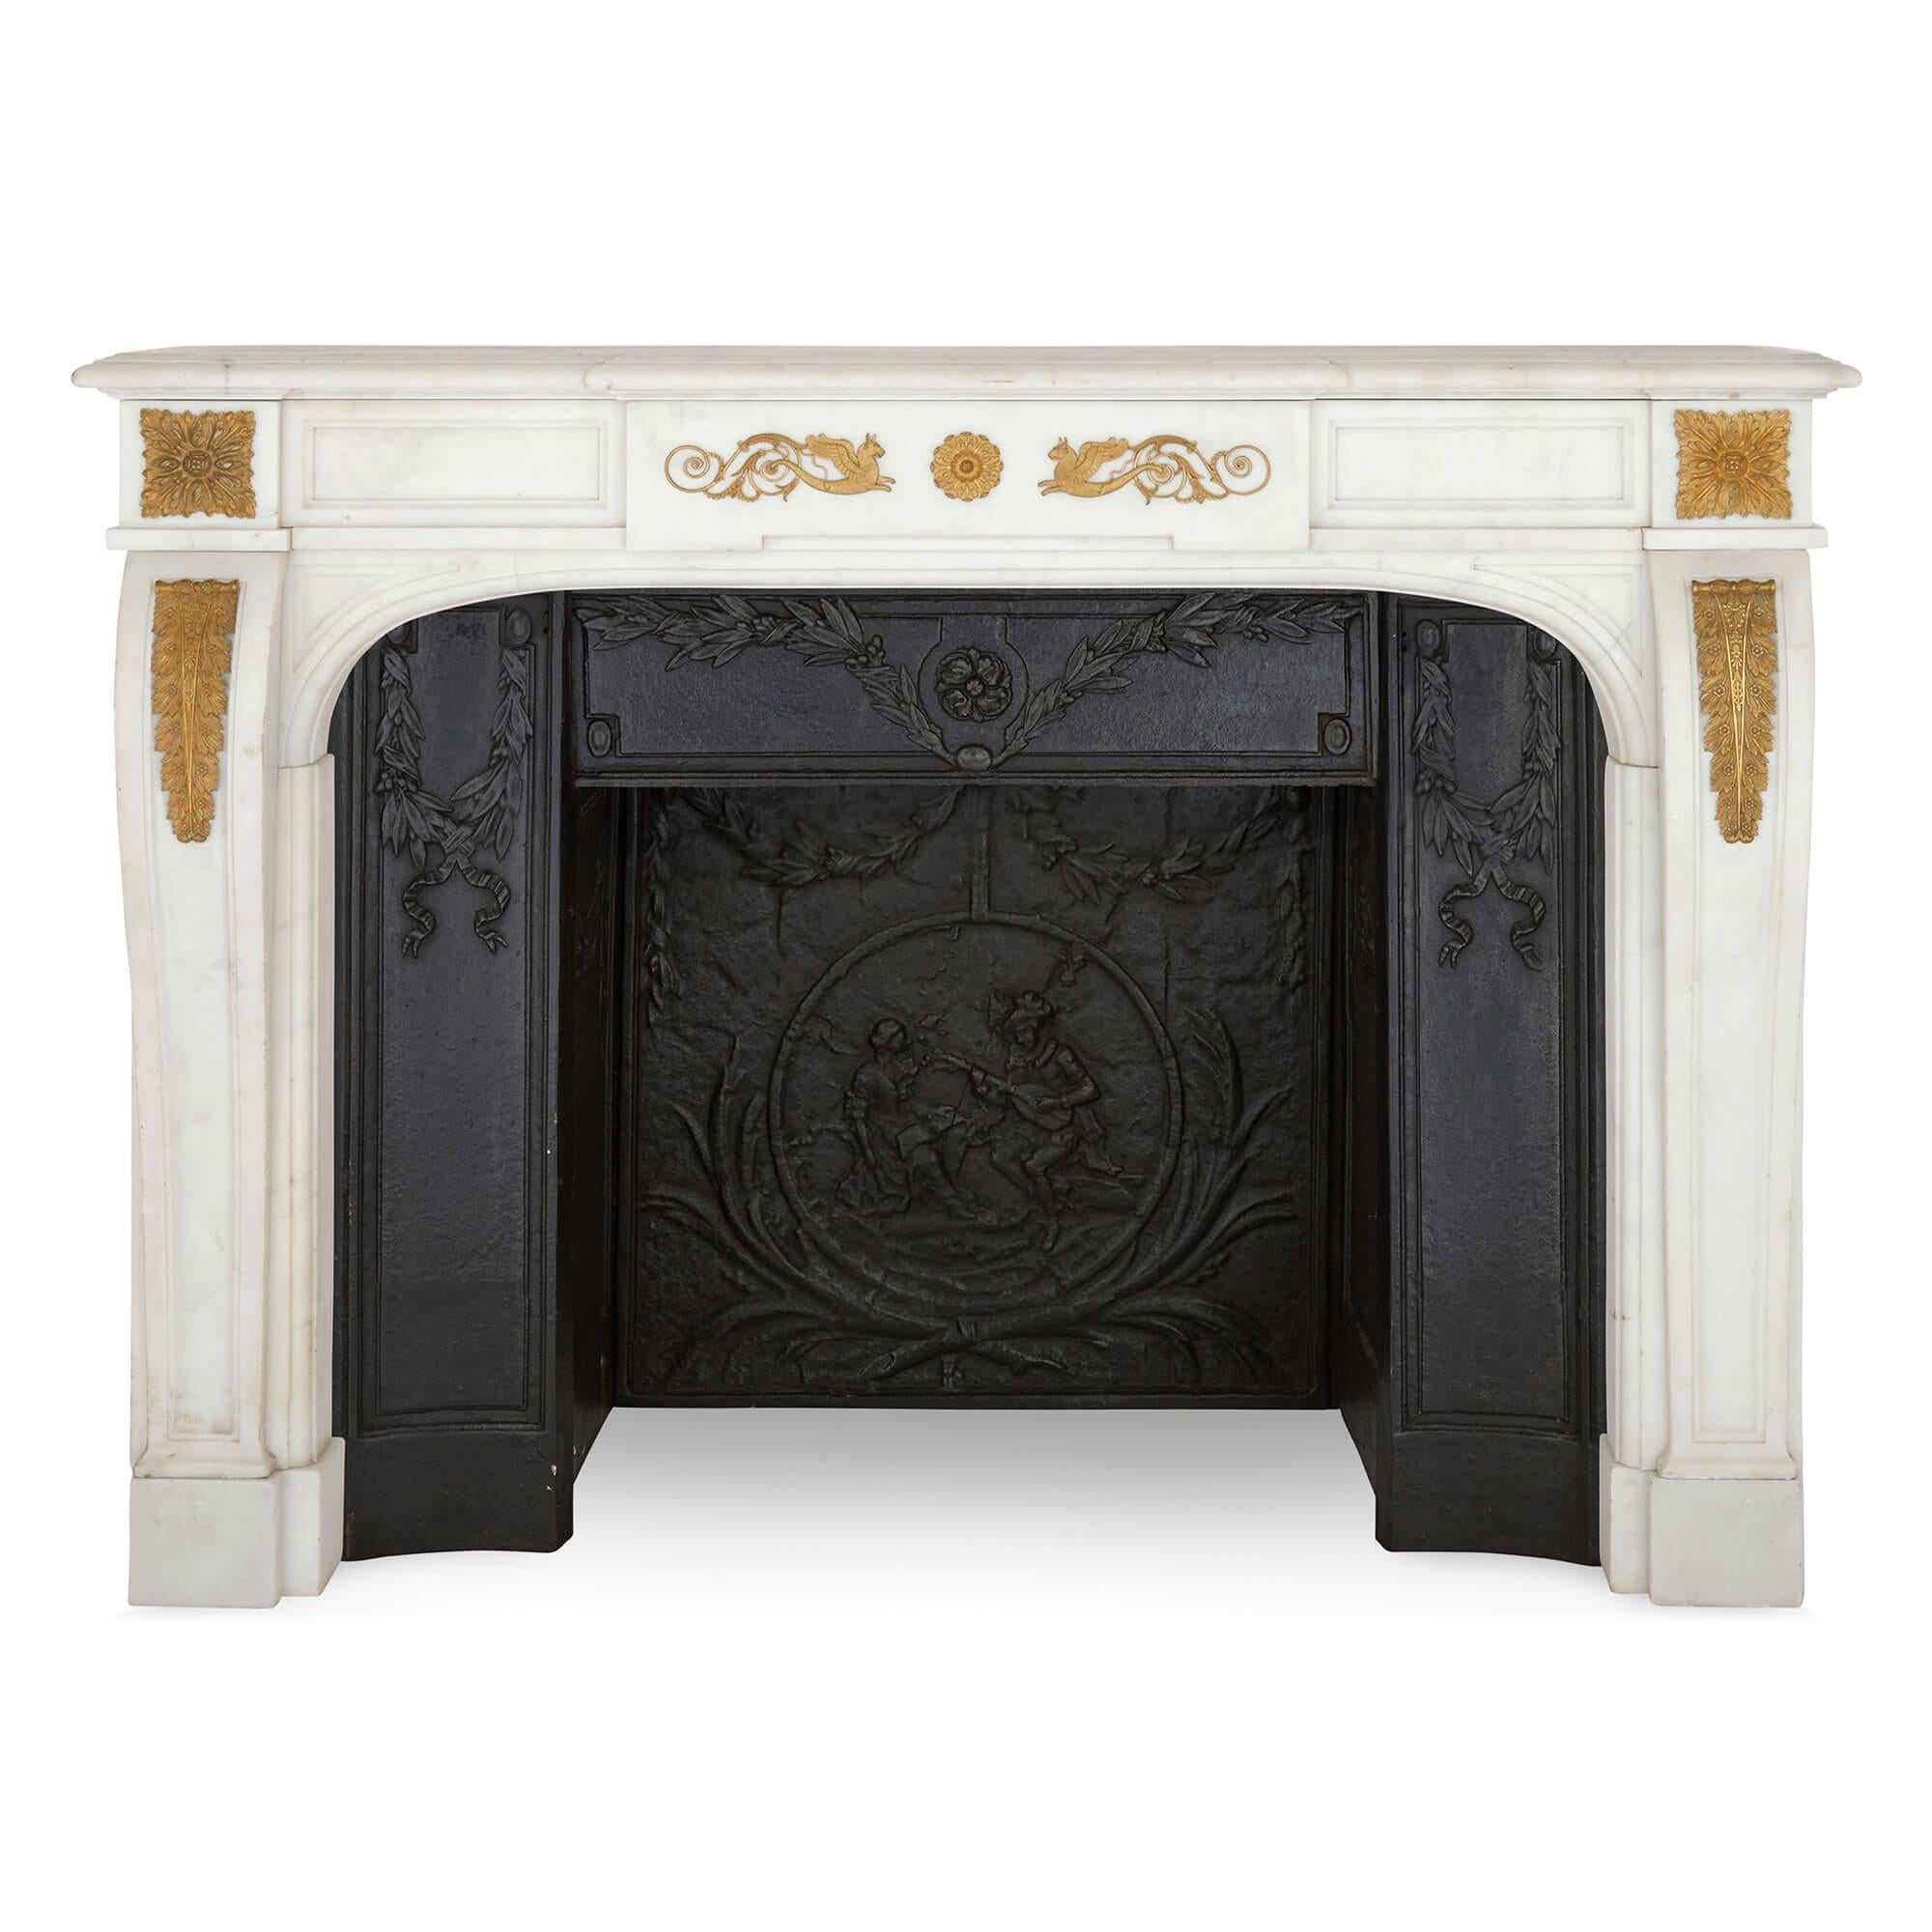 Pair of antique French ormolu mounted marble fireplaces with cast iron insets 
French, Late 19th Century 
Fireplaces: Height 112cm, width 152cm, depth 33cm
Iron inserts: Height 89cm, width 115cm, depth 46cm

Made in late 19th century France from